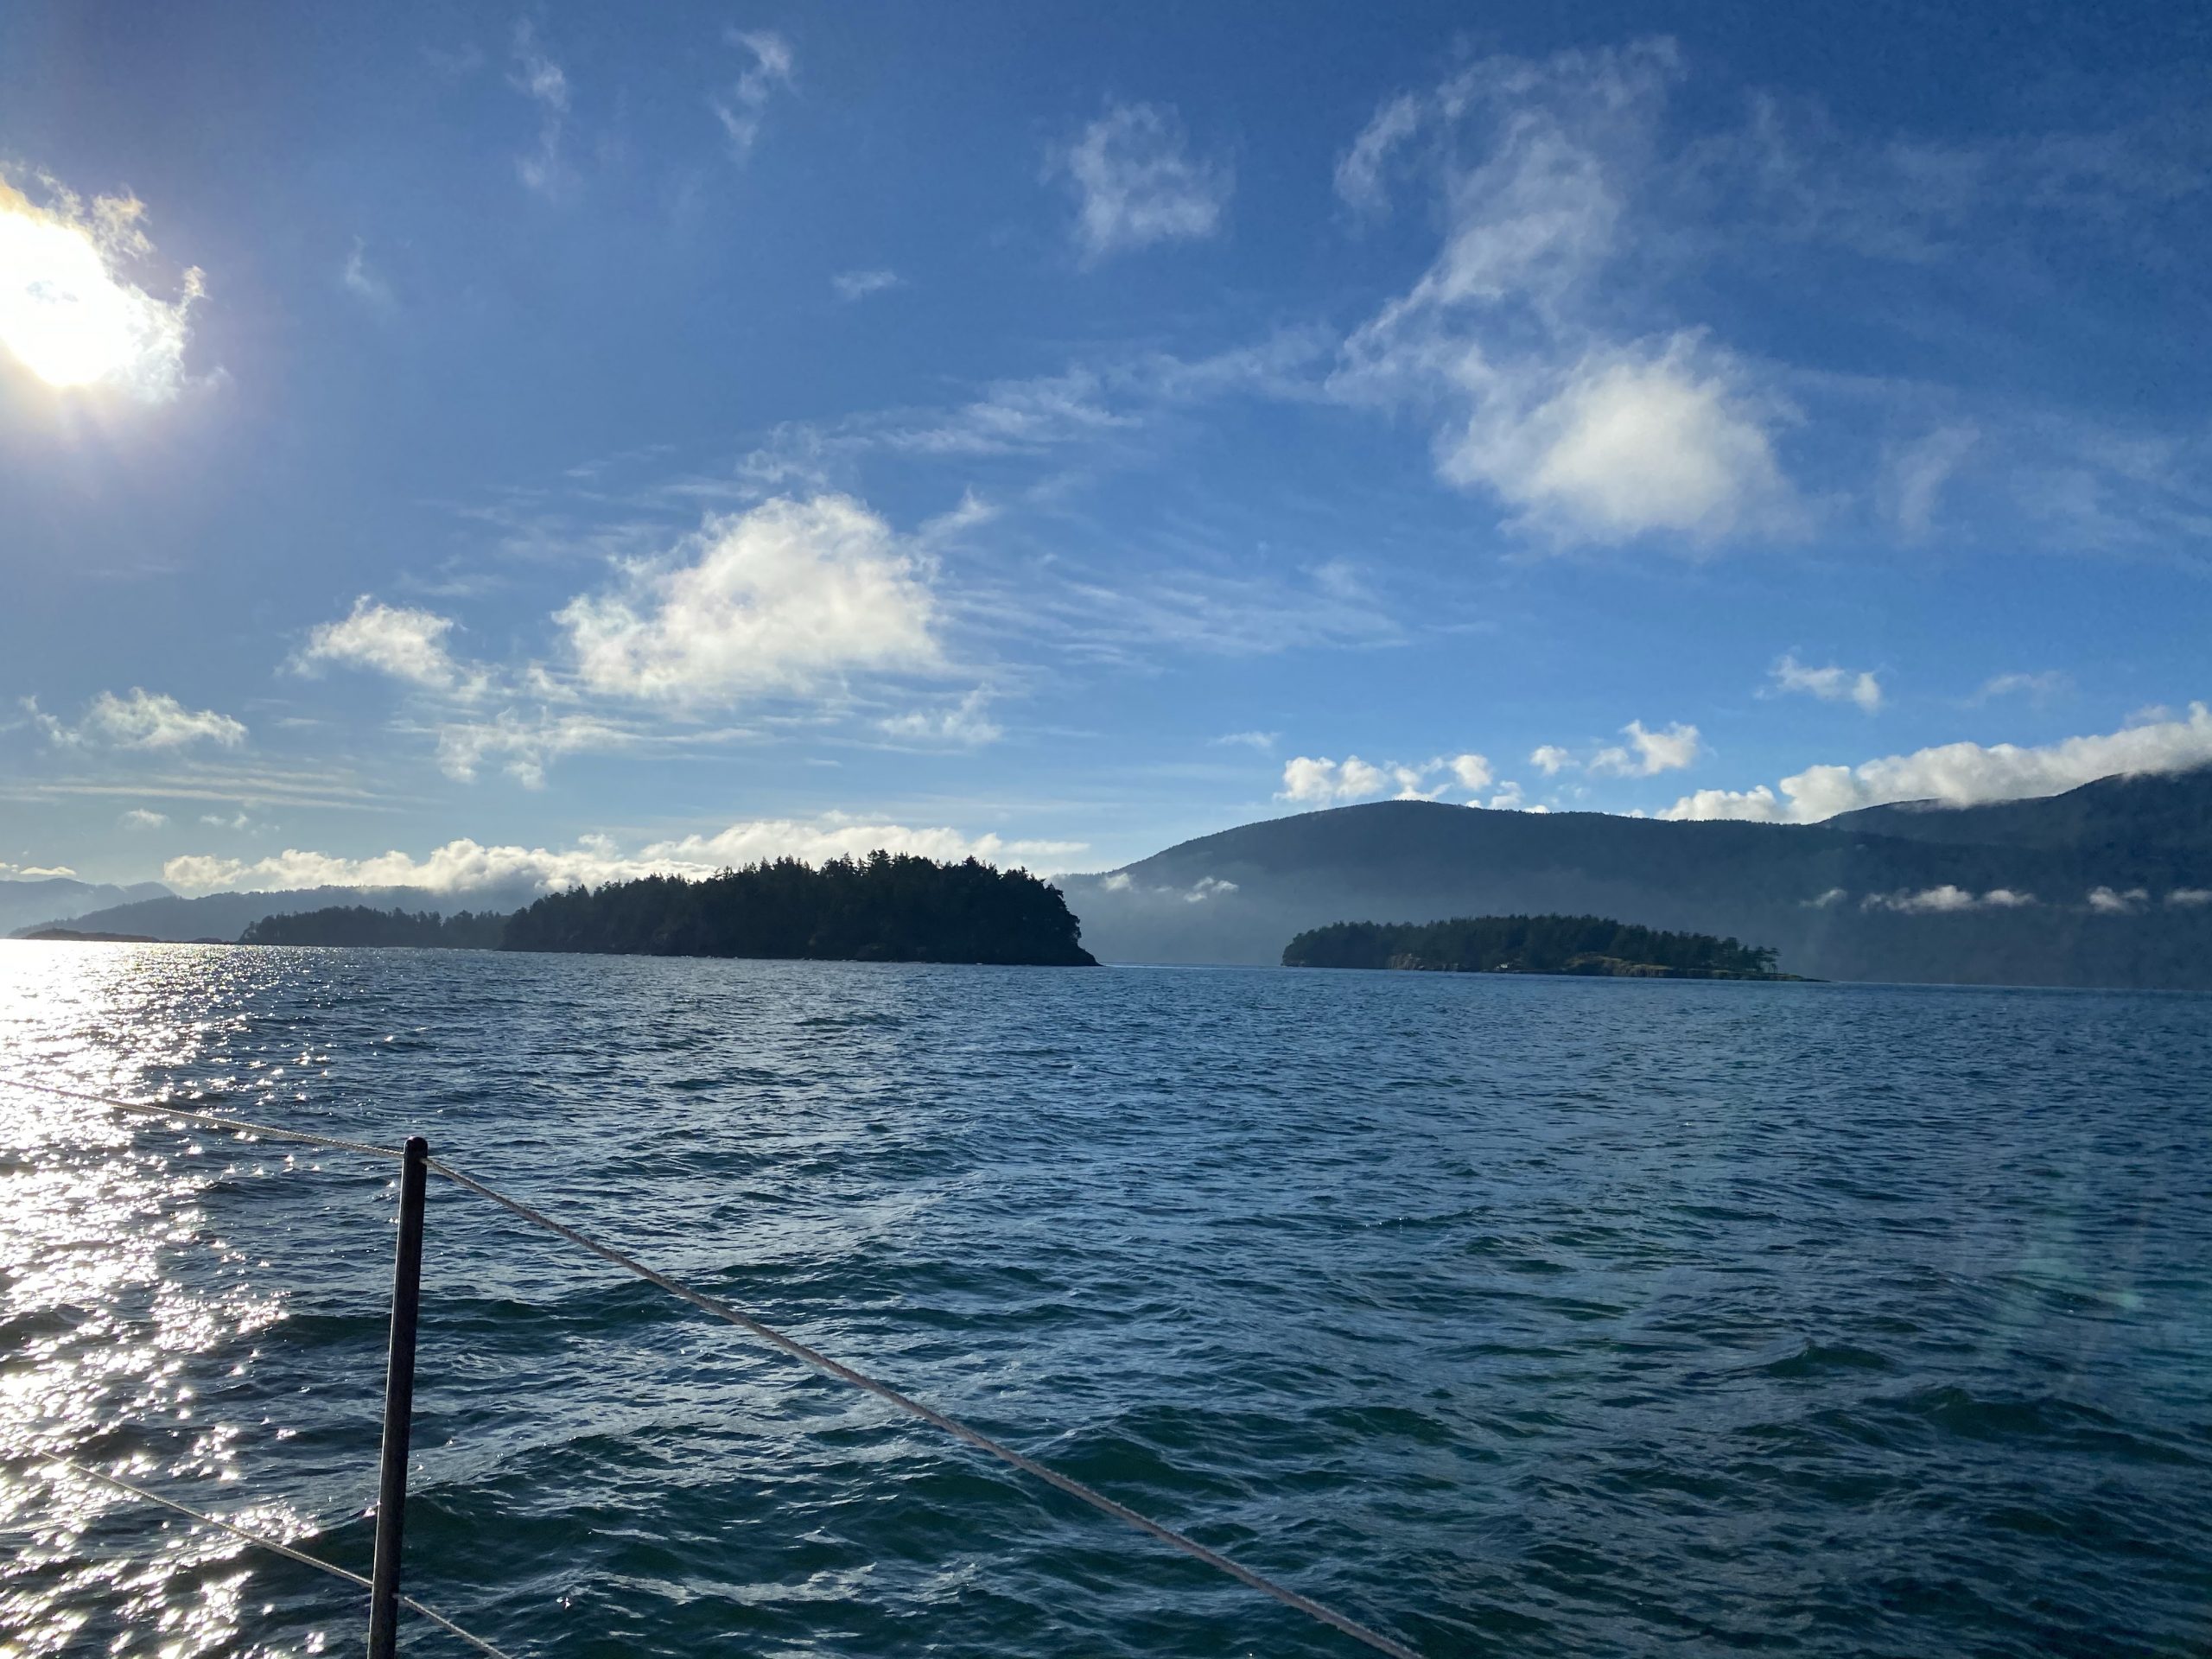 Orcas Island, the Barnes islands, and the Sisters